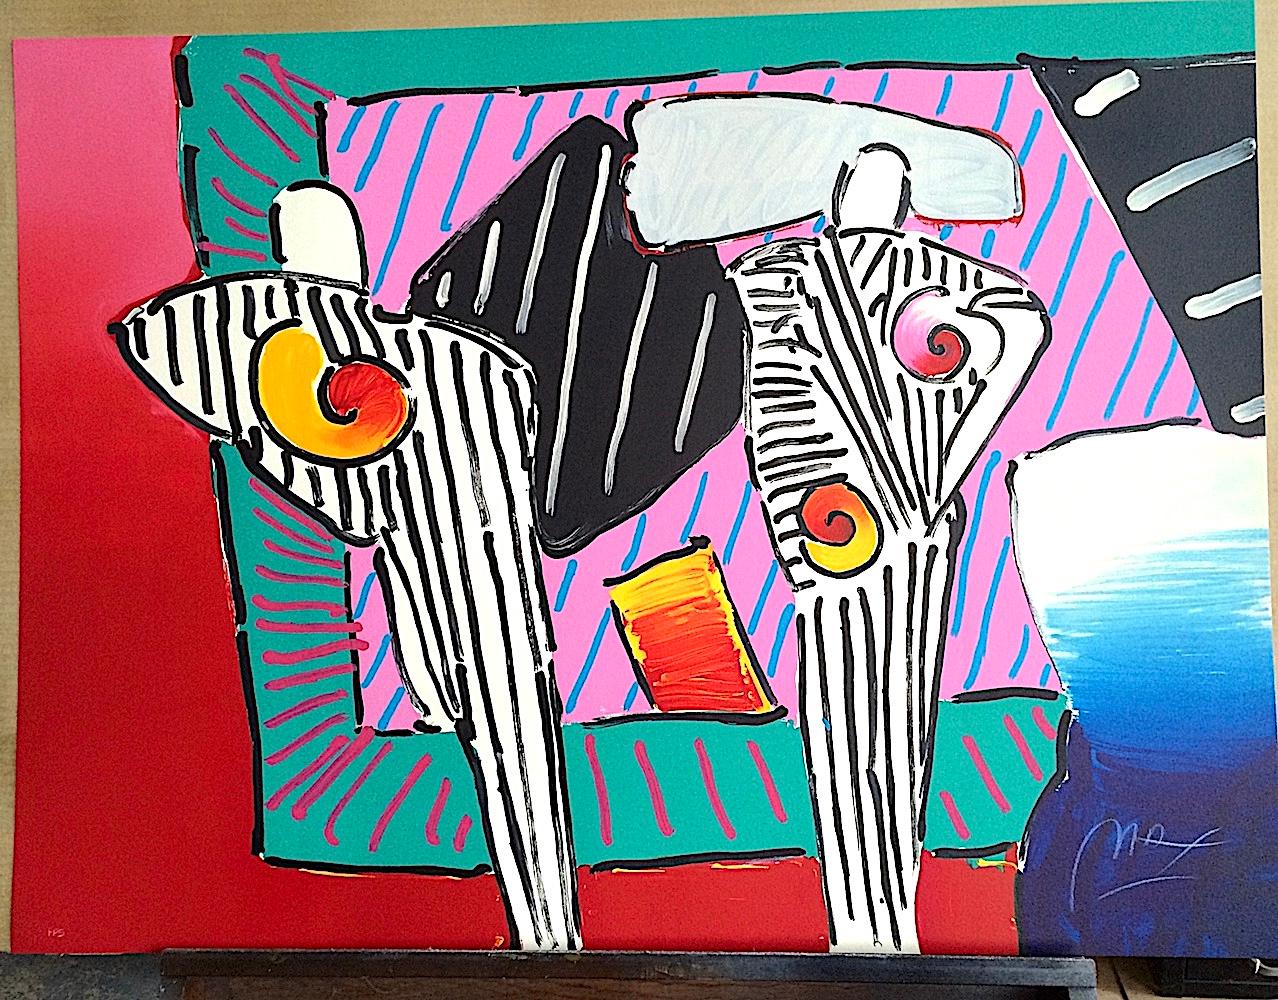 TIMELINE DEGA MAN Signed Lithograph, Memphis-Inspired Colors Black White Stripes - Pop Art Print by Peter Max